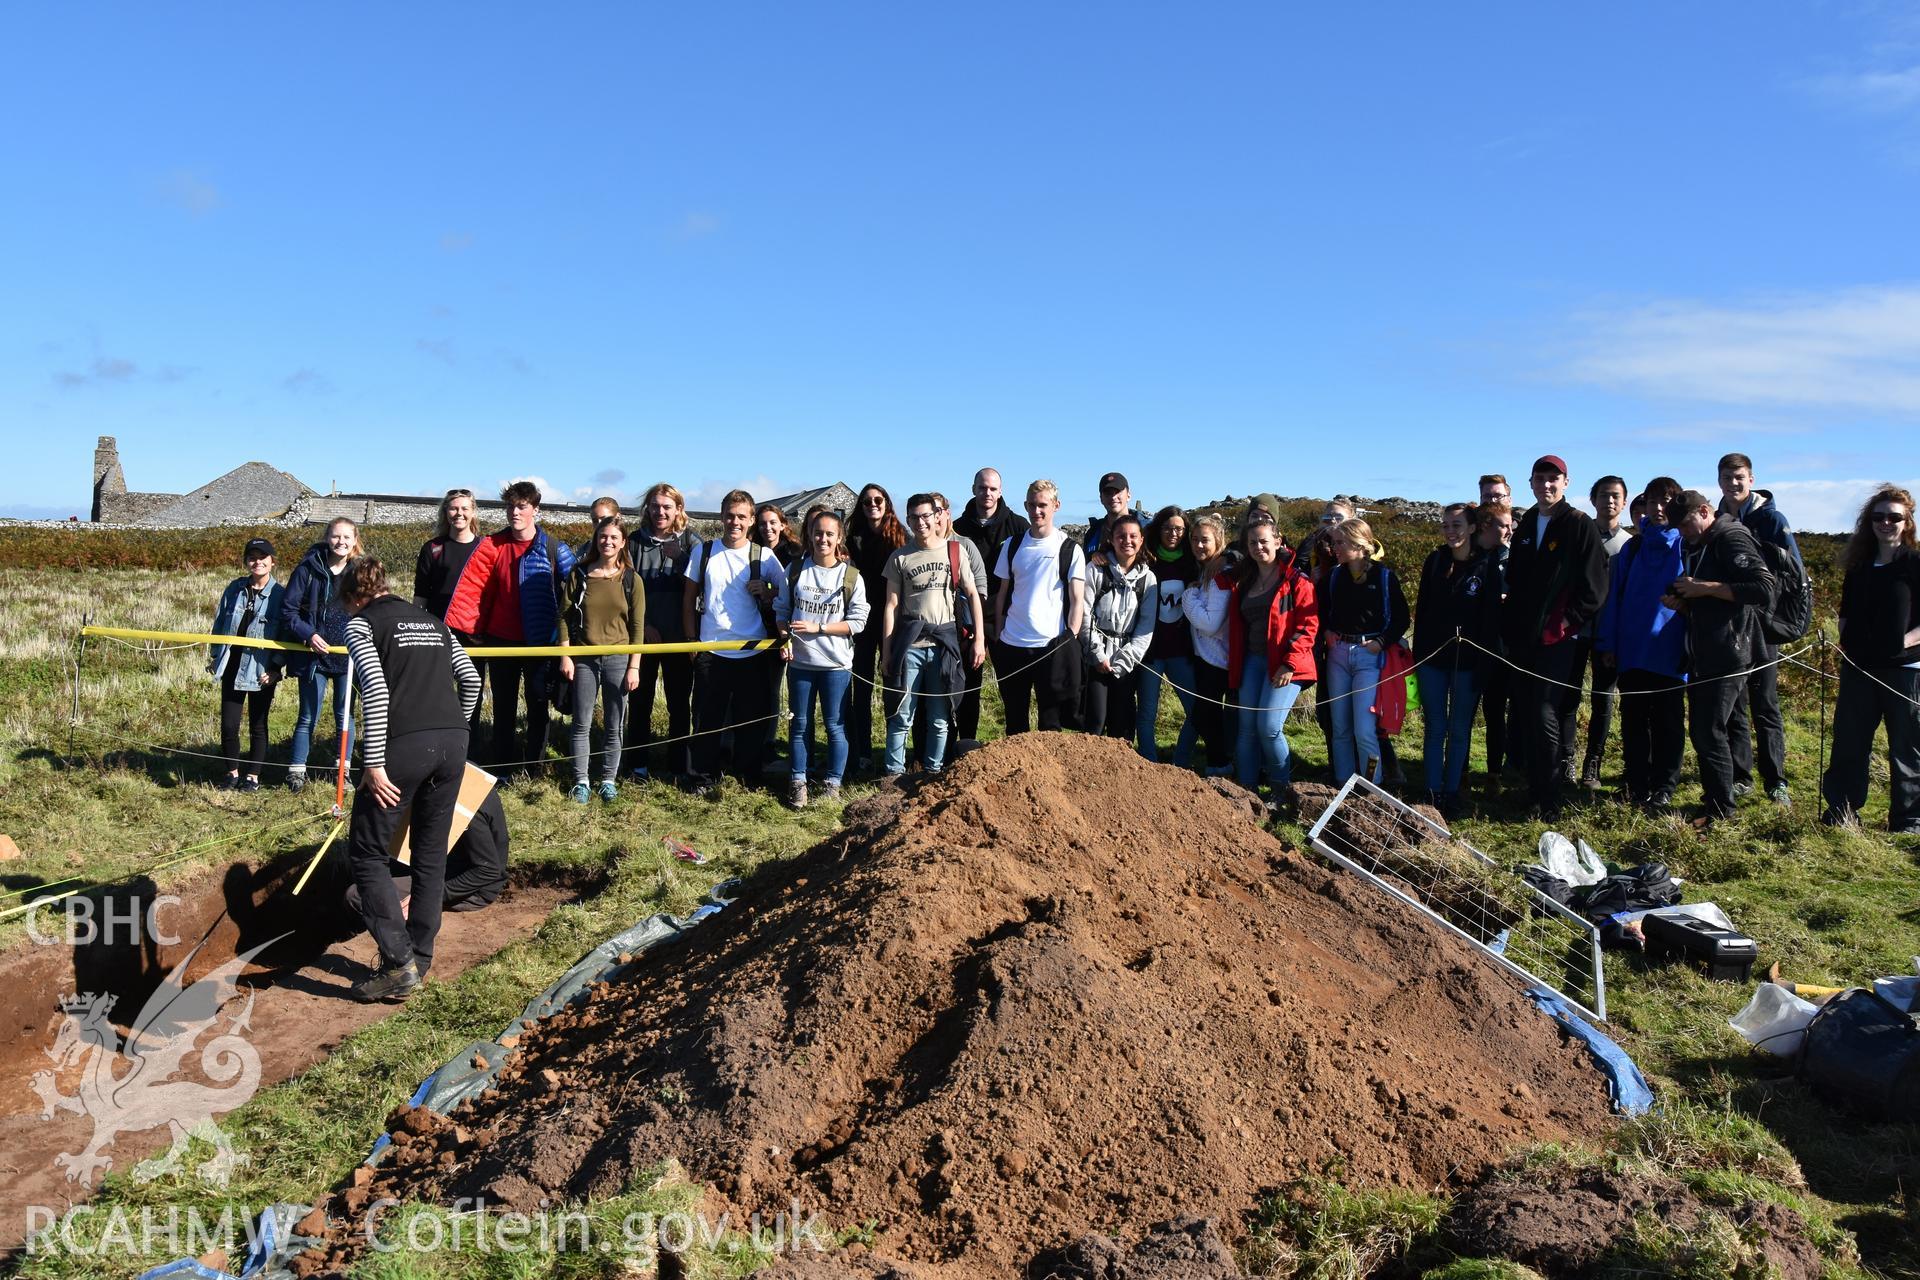 Investigator's photography showing the evaluation excavation of a geophysical anomaly in Well Meadow, Skomer Island, between 25-27th Sept 2018 as part of the Skomer Island Project. Visit to trench by students from Southampton University.